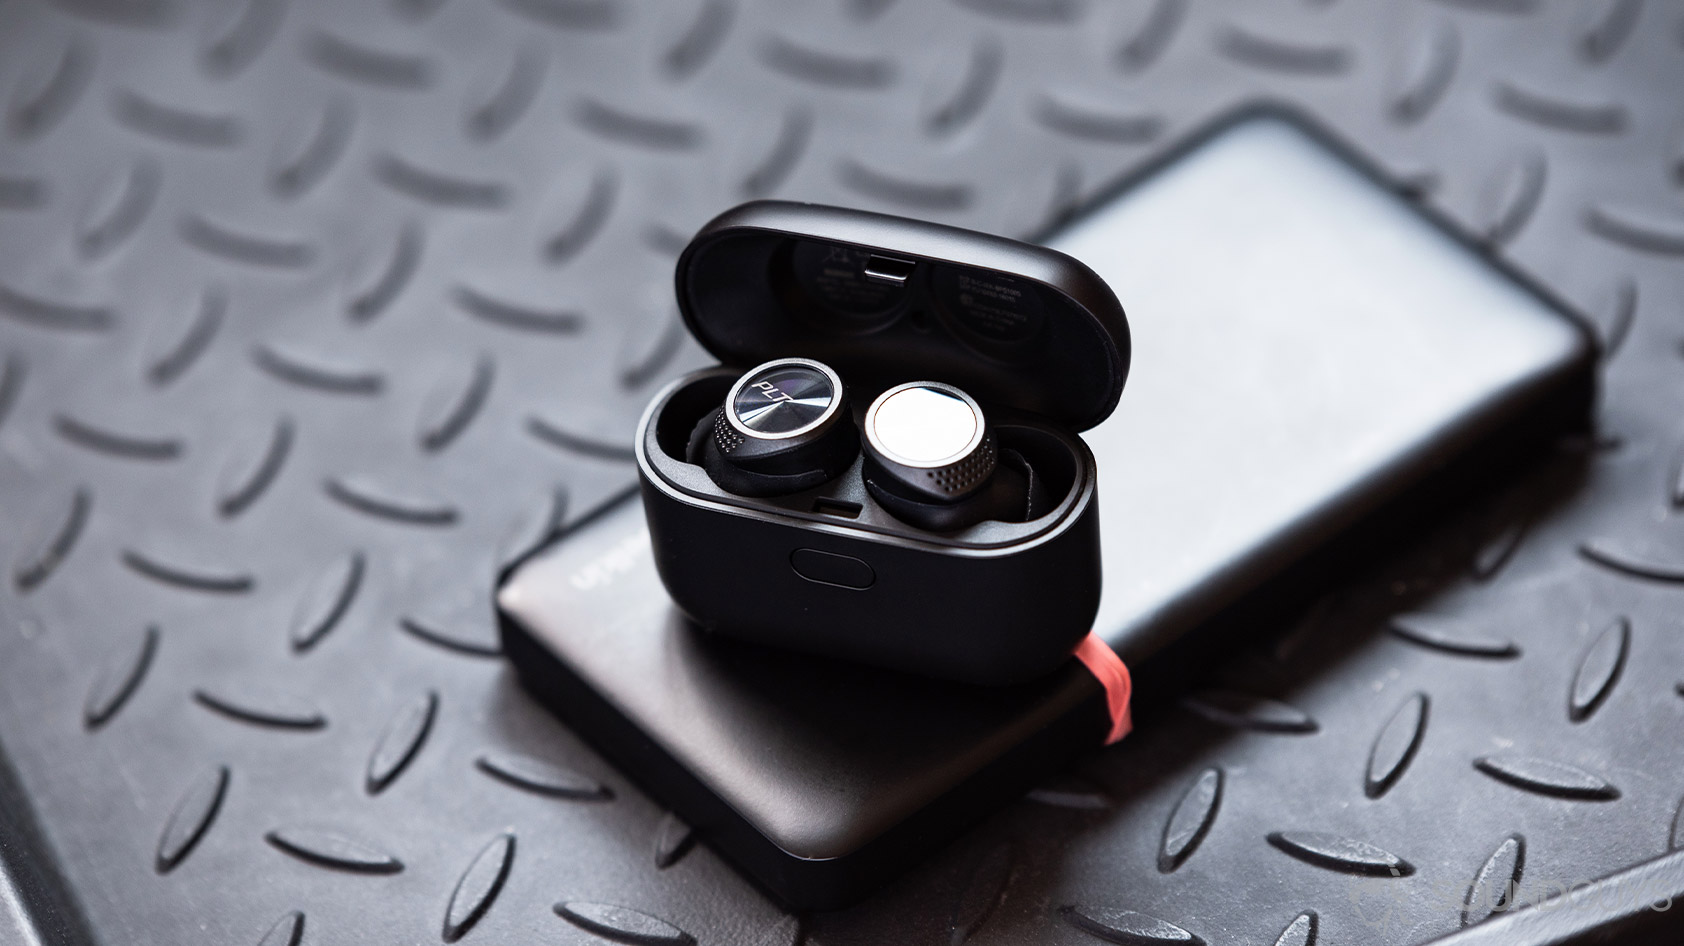 A picture of the Plantronics BackBeat Pro 5100 true wireless earbuds in the provided case, both are black.